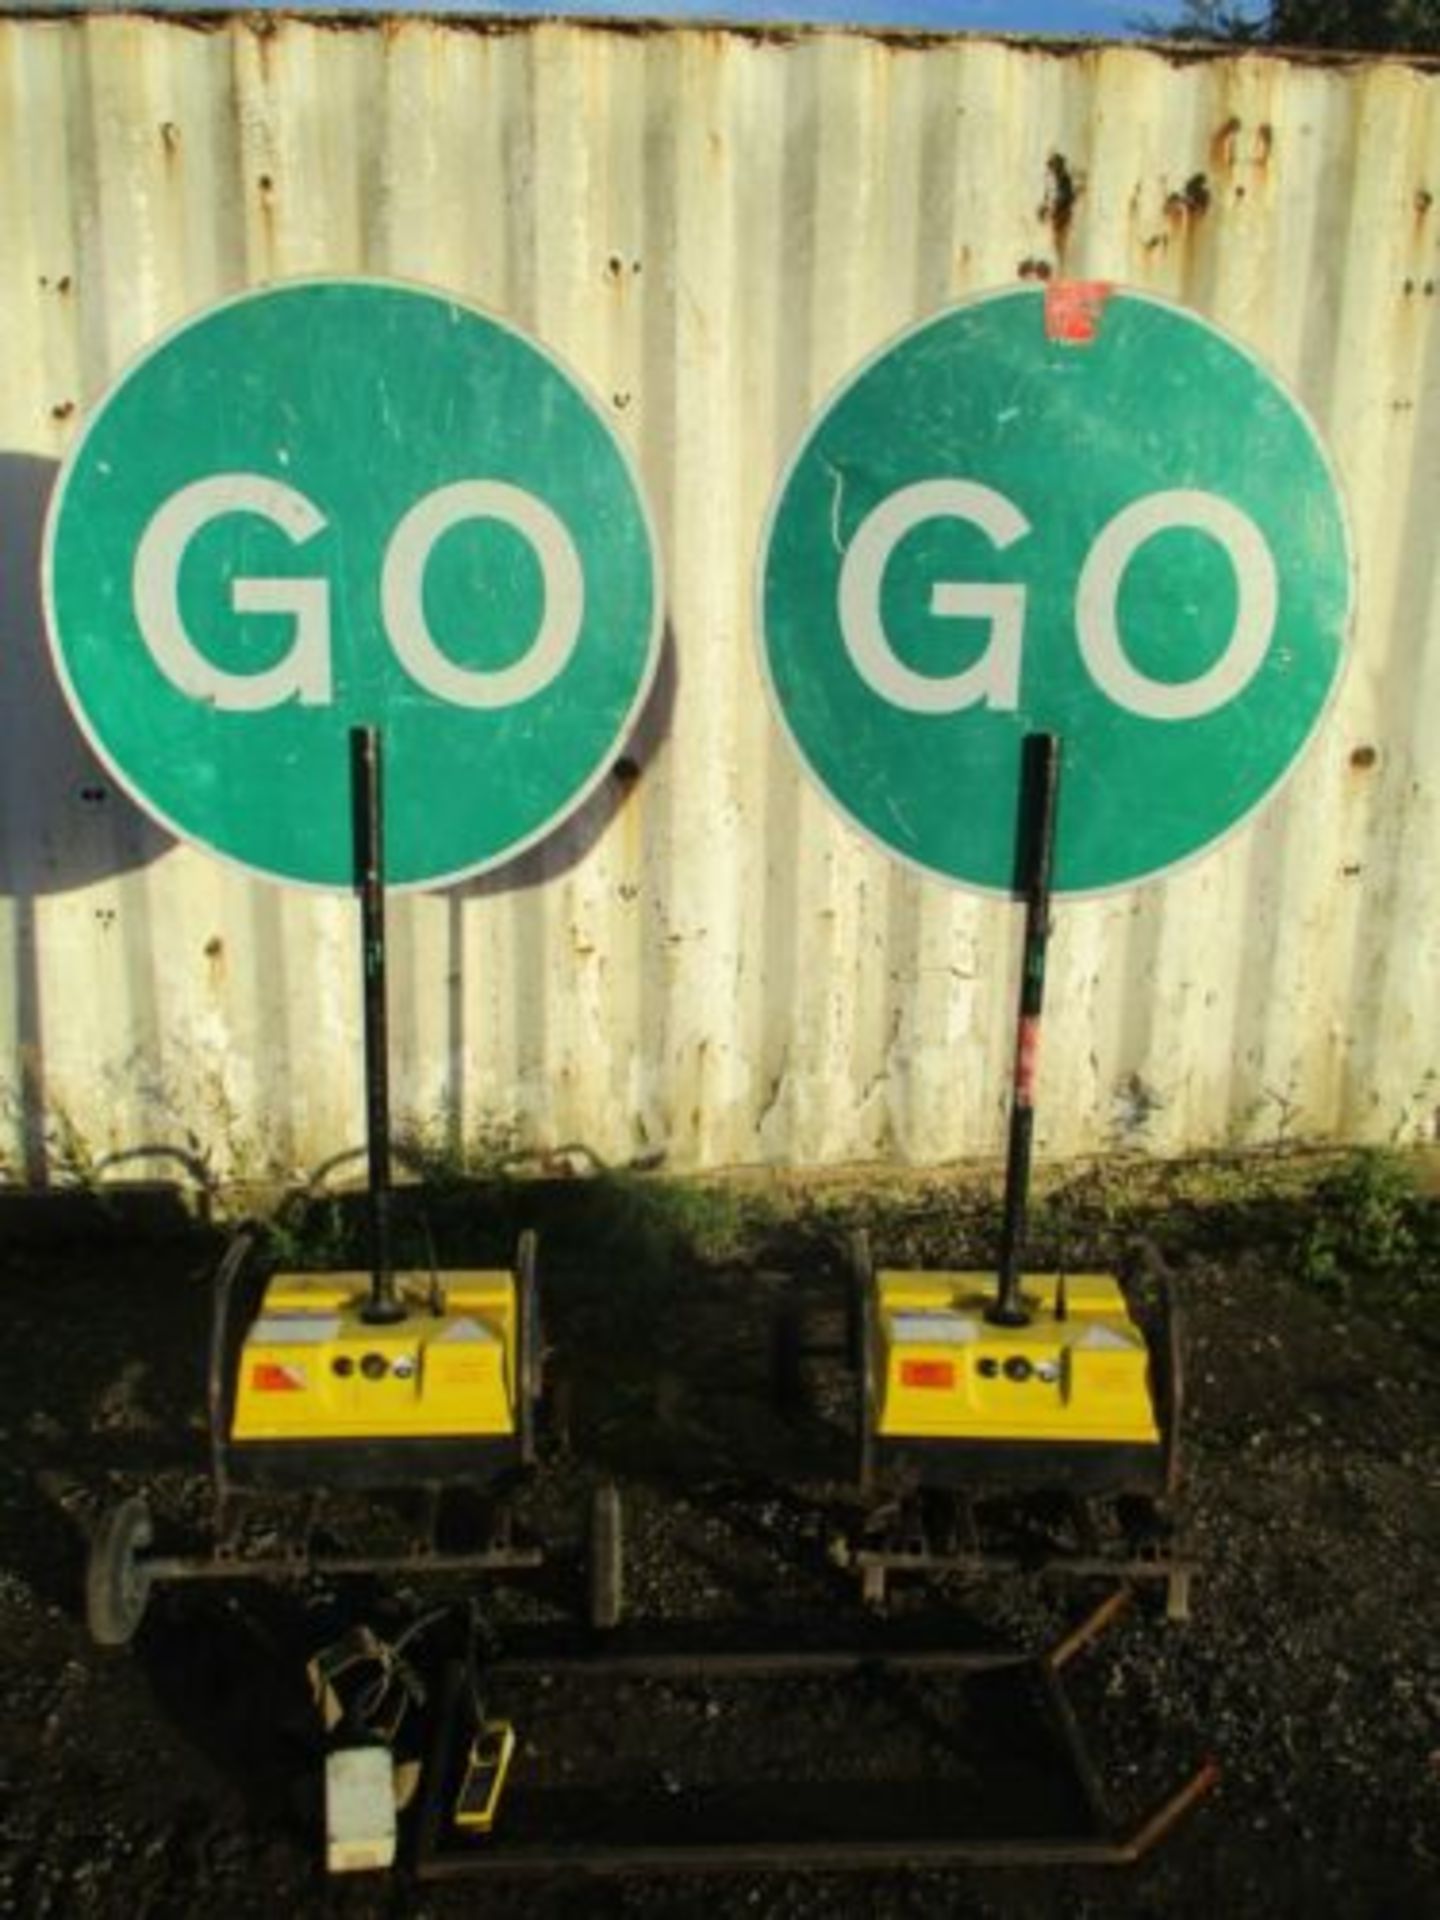 PIKE ROBOSIGN STOP GO BOARDS TRAFFIC LIGHTS SIGN LIGHT BATTERY 2 WAY DELIVERY - Image 2 of 4